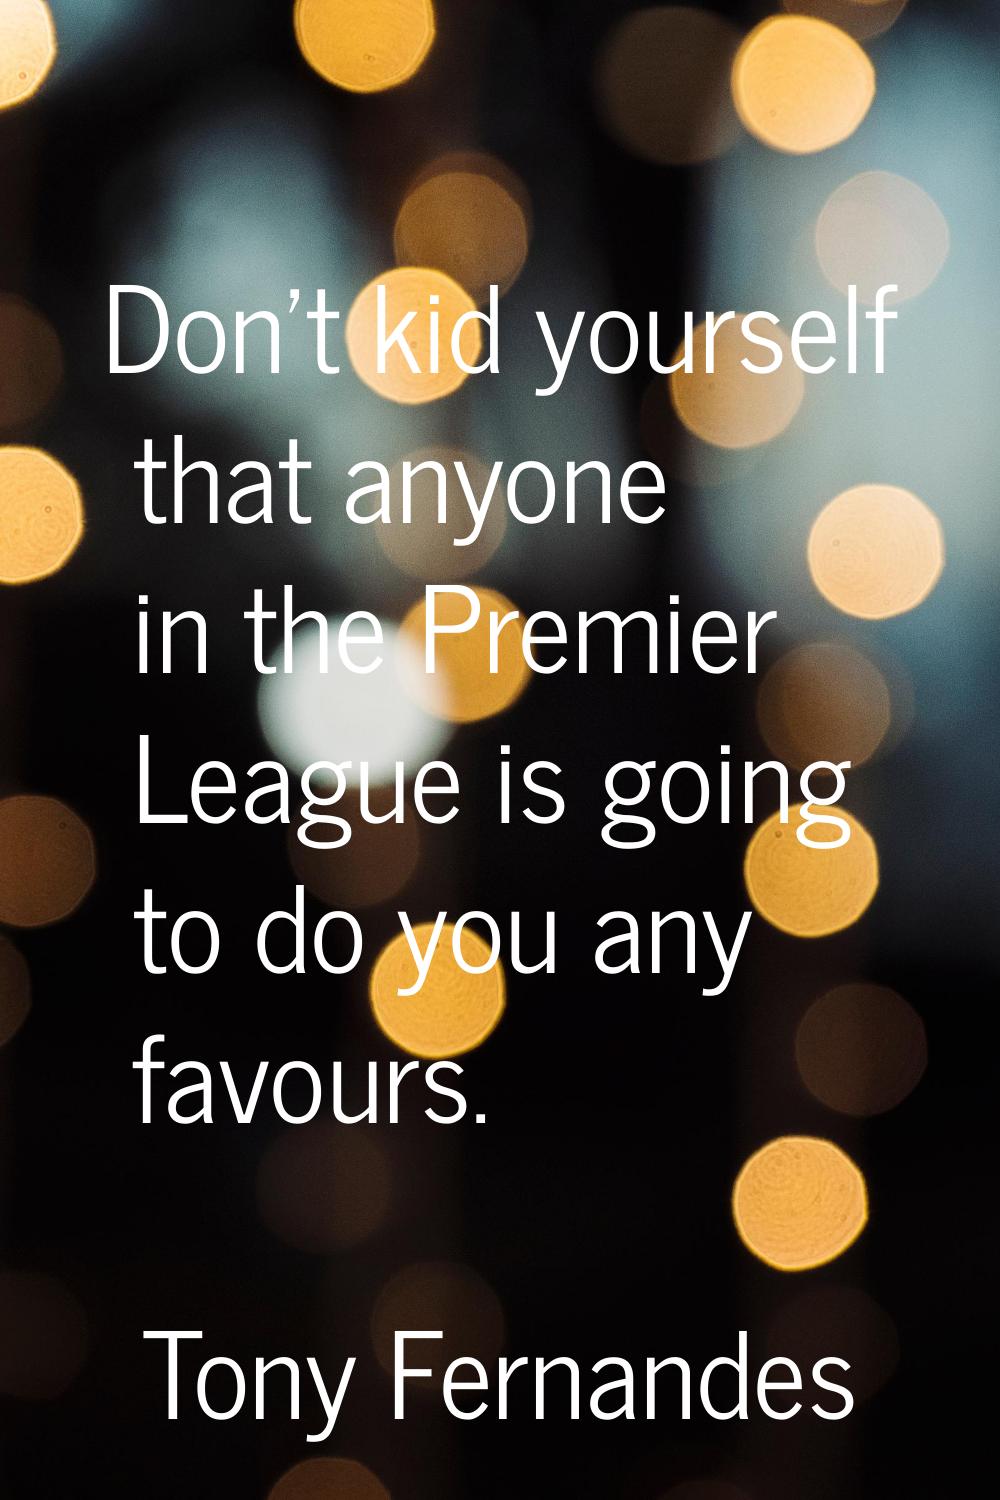 Don't kid yourself that anyone in the Premier League is going to do you any favours.